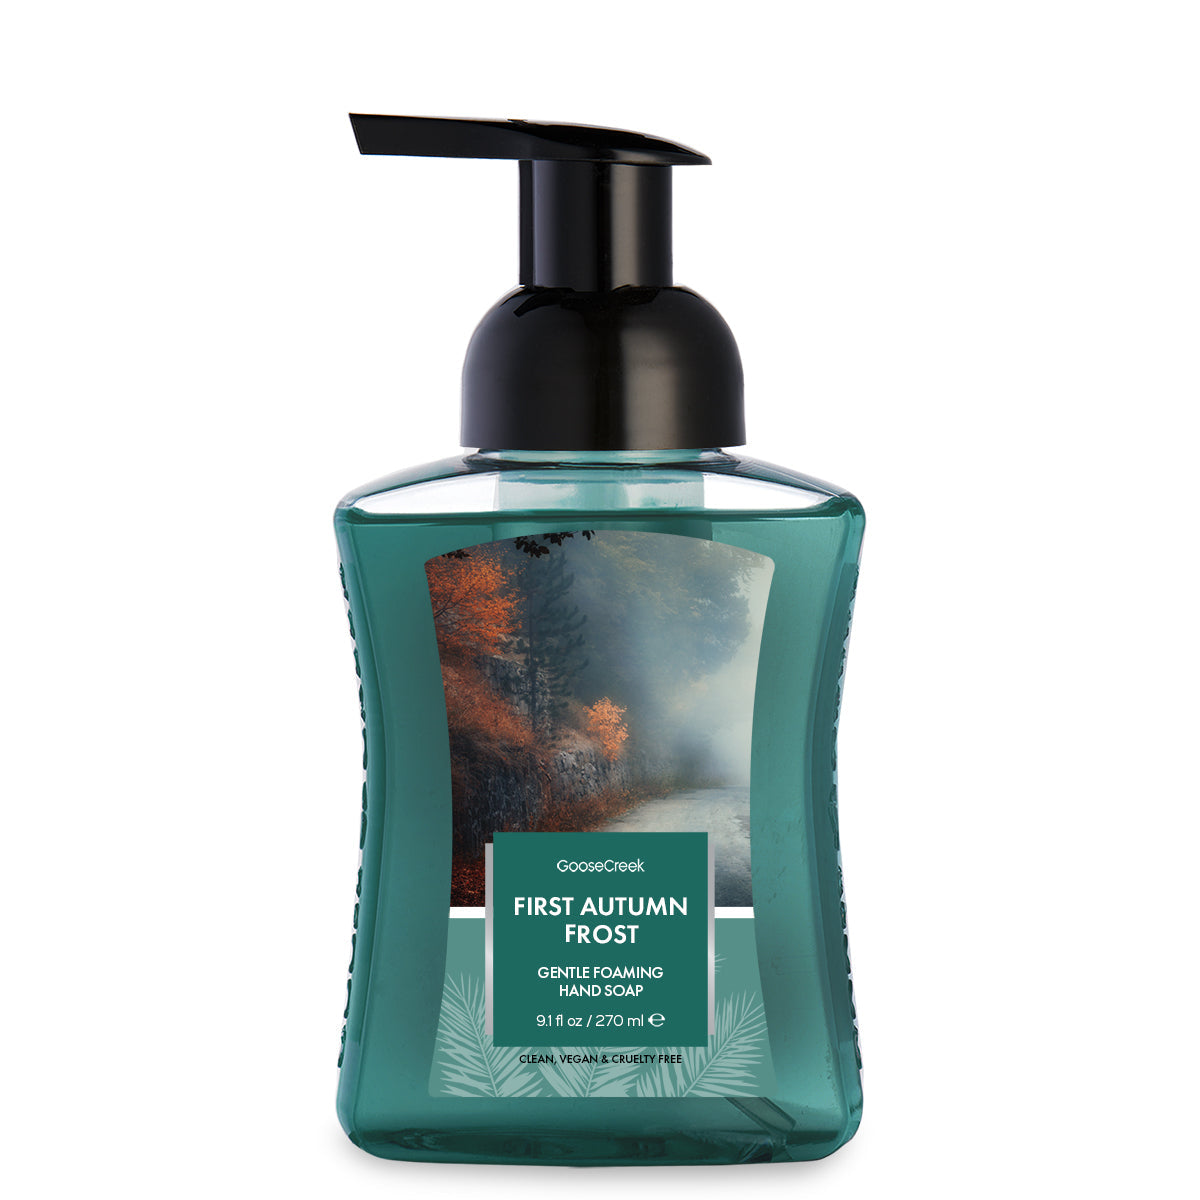 First Autumn Frost Lush Foaming Hand Soap